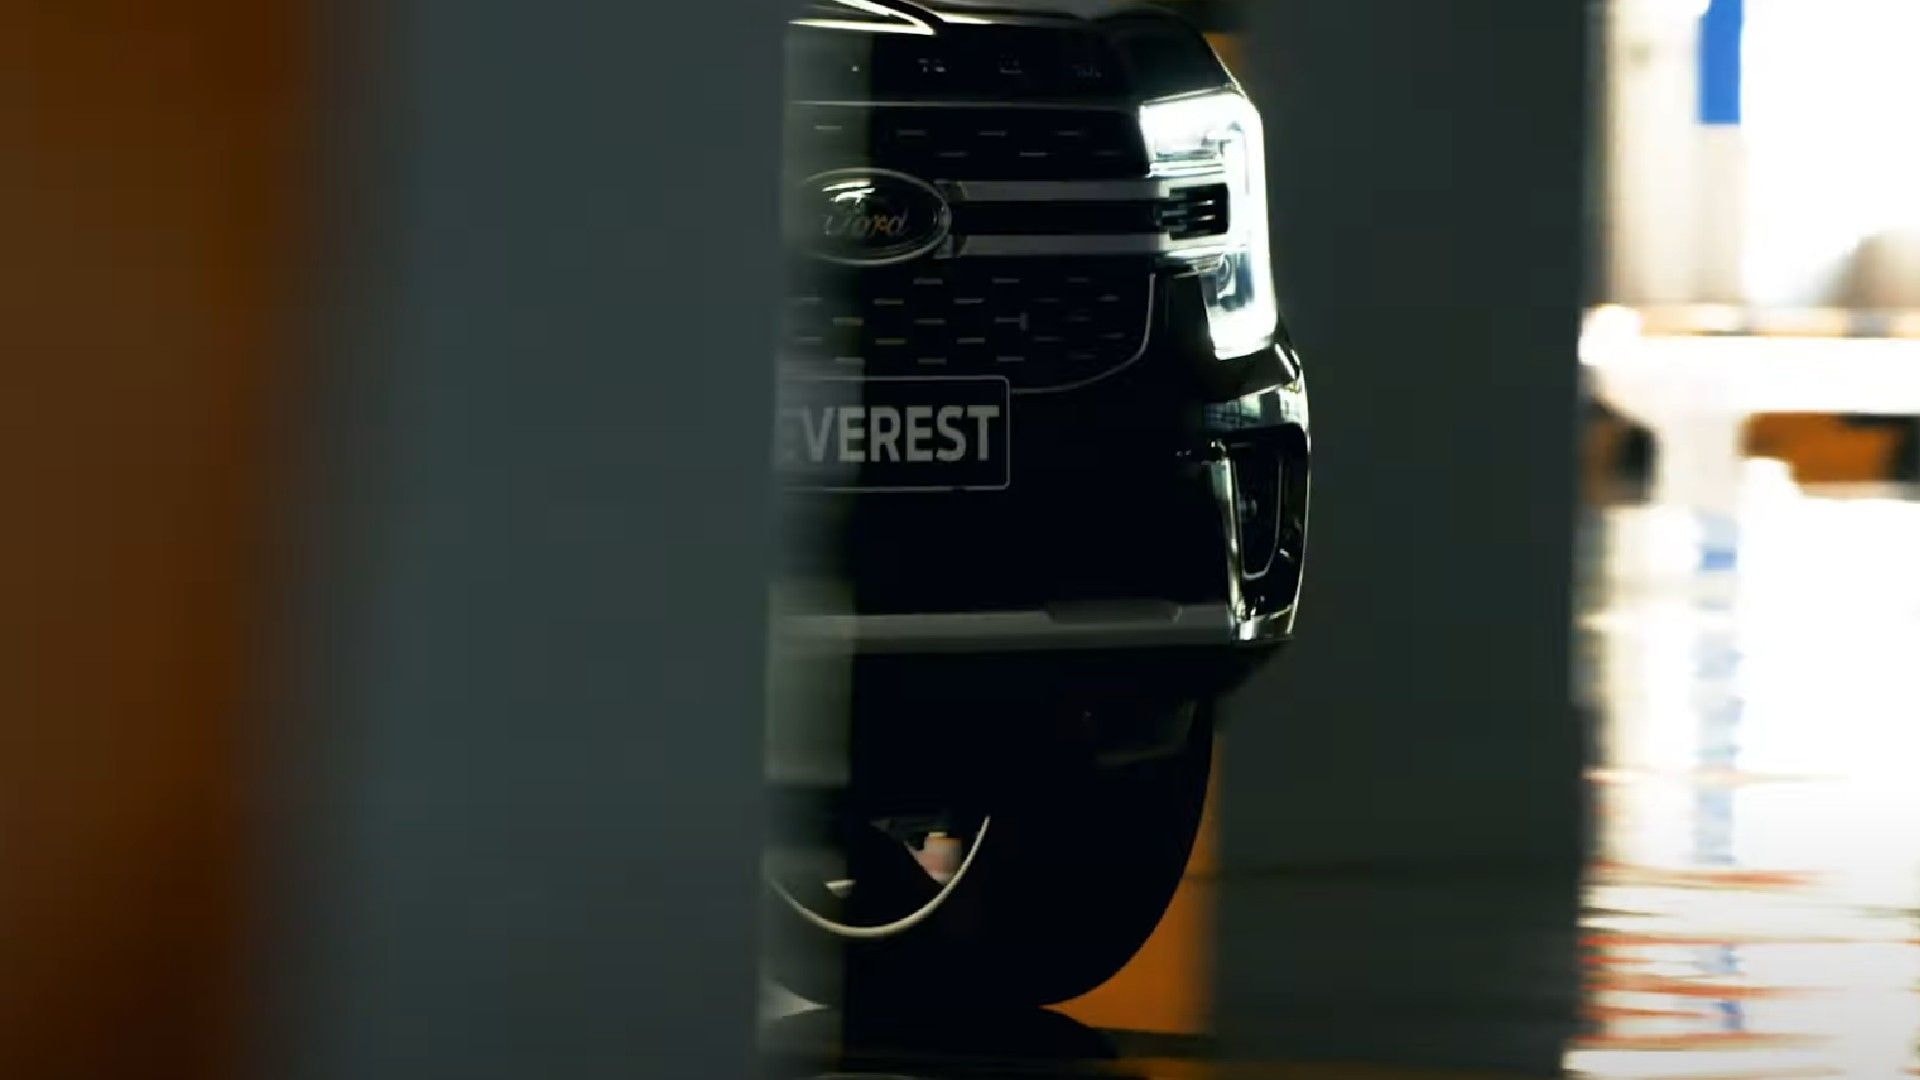 2022 Ford Everest teased ahead of debut on March 1, 2022